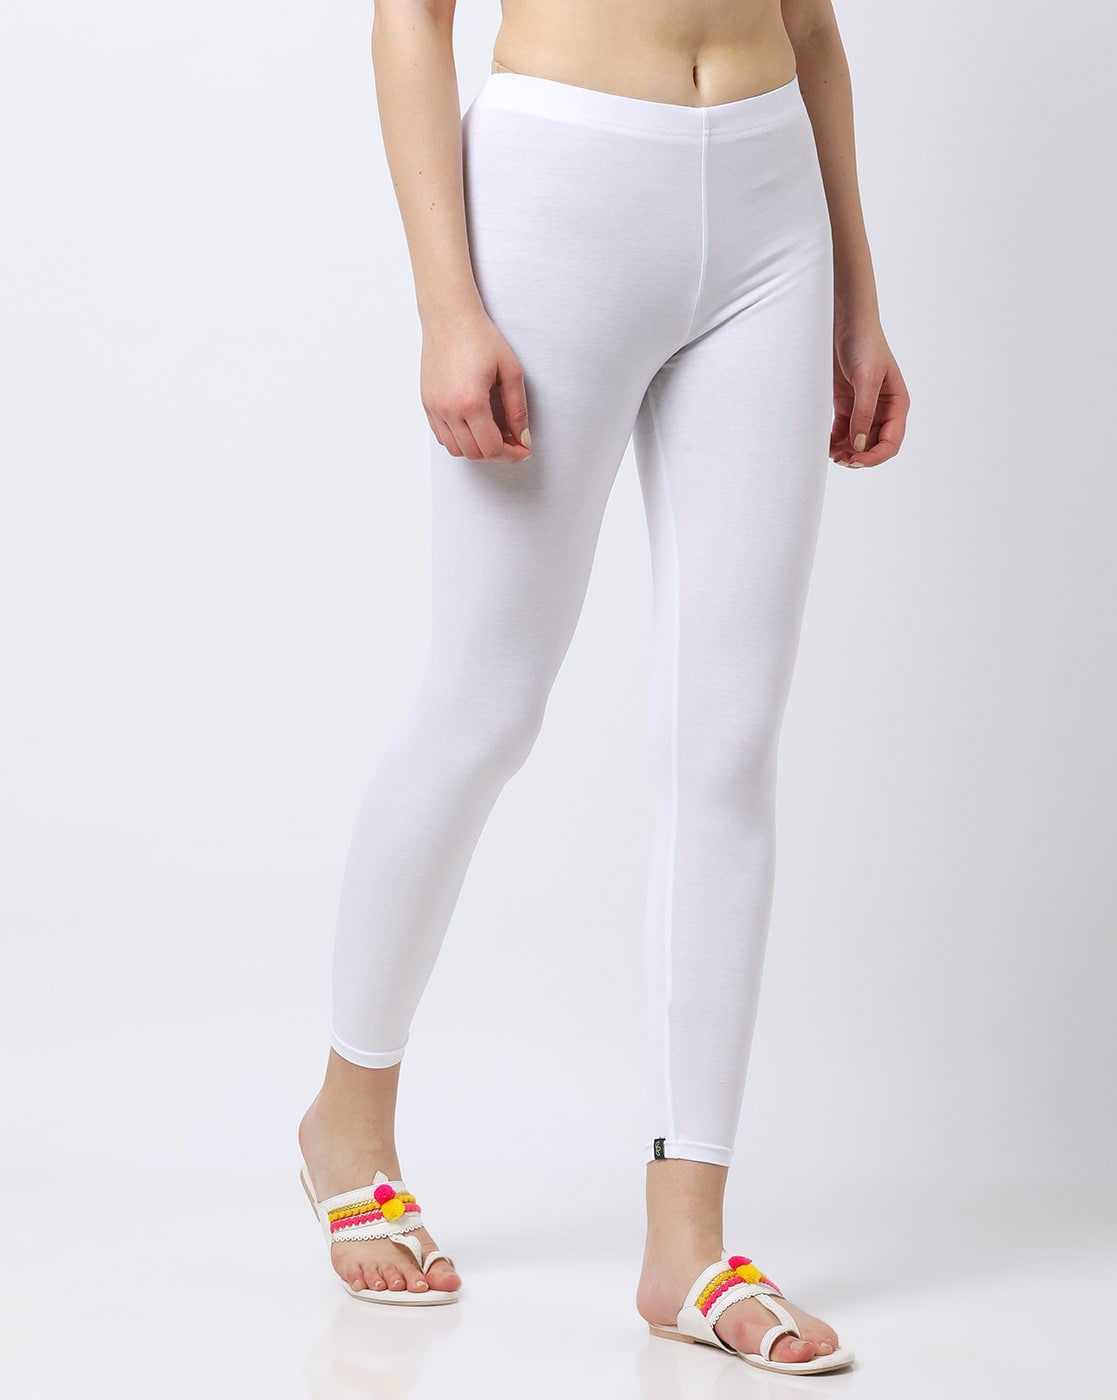 Beautiful Leggings for Women online 94% Organic Cotton buy Now | Blily-seedfund.vn